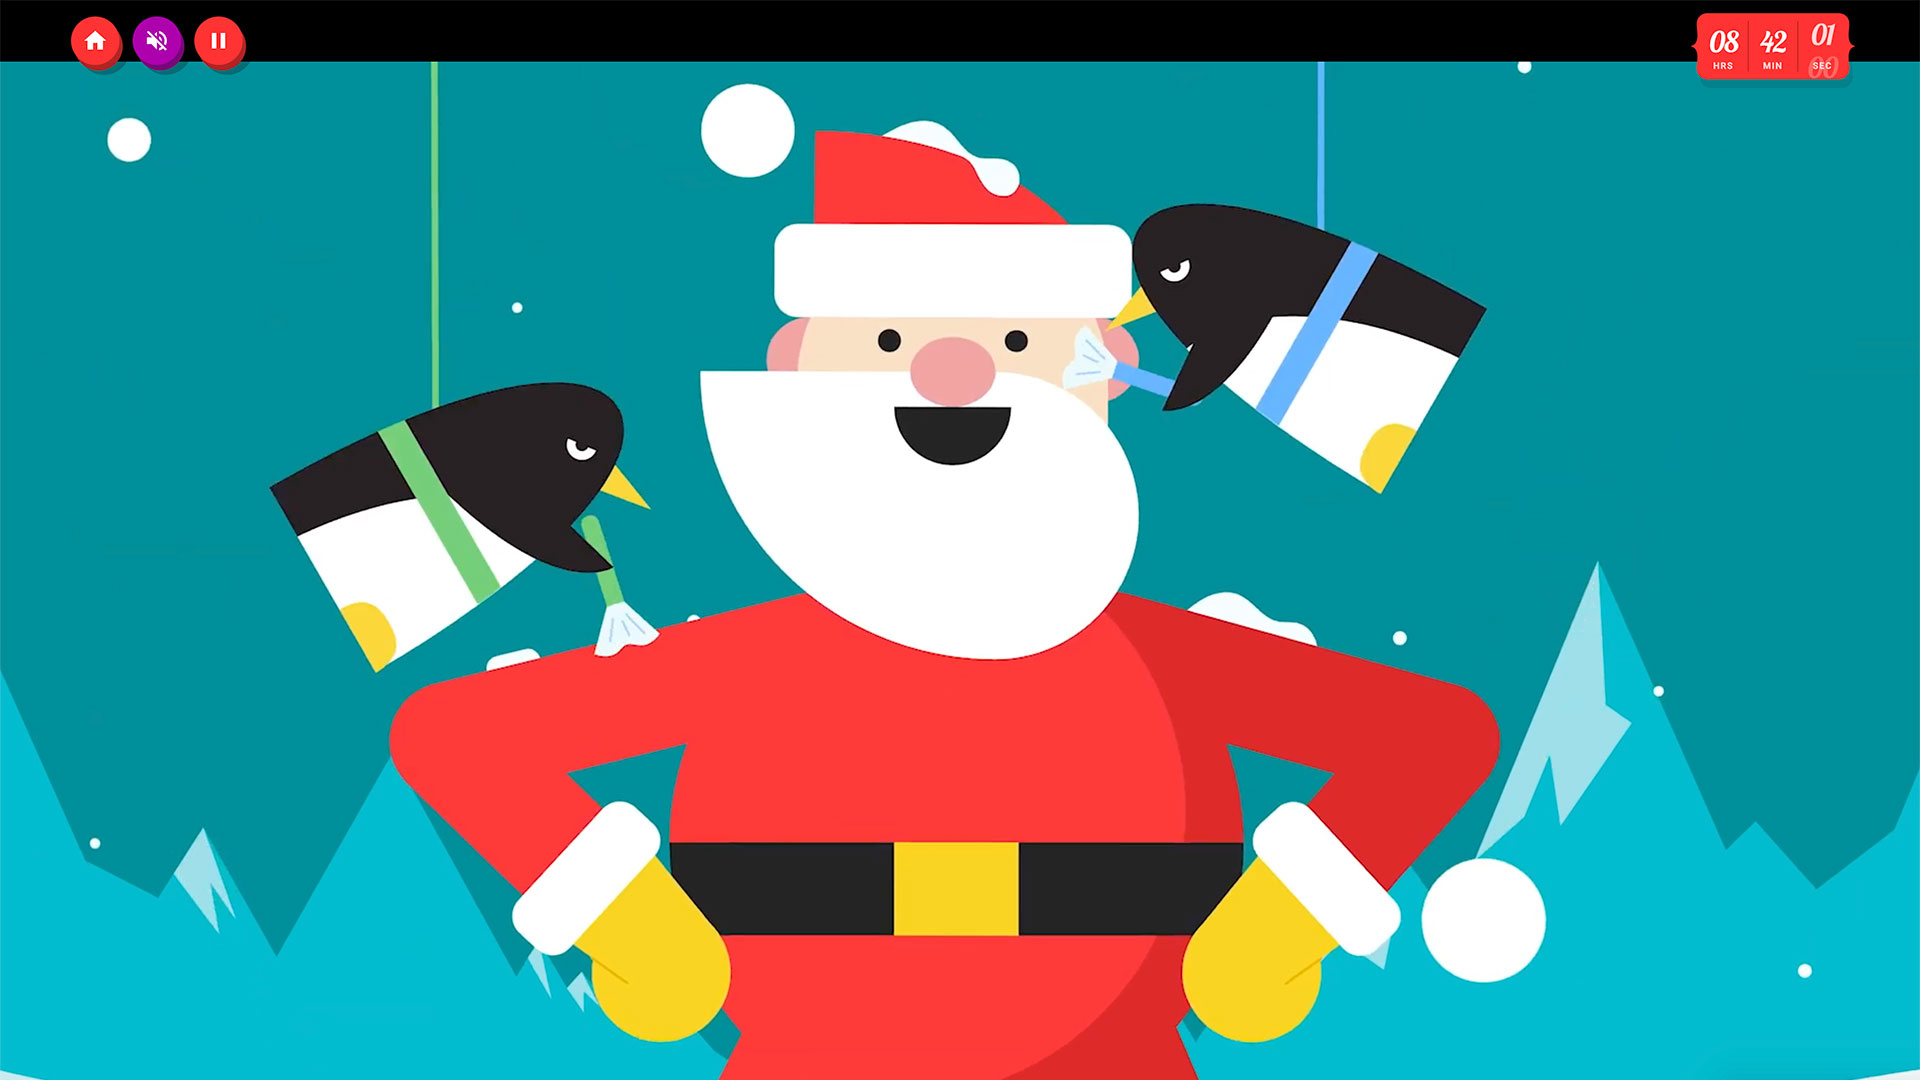 A still from the intro video to Google's 2022 Santa tracker showing Santa and two penguins